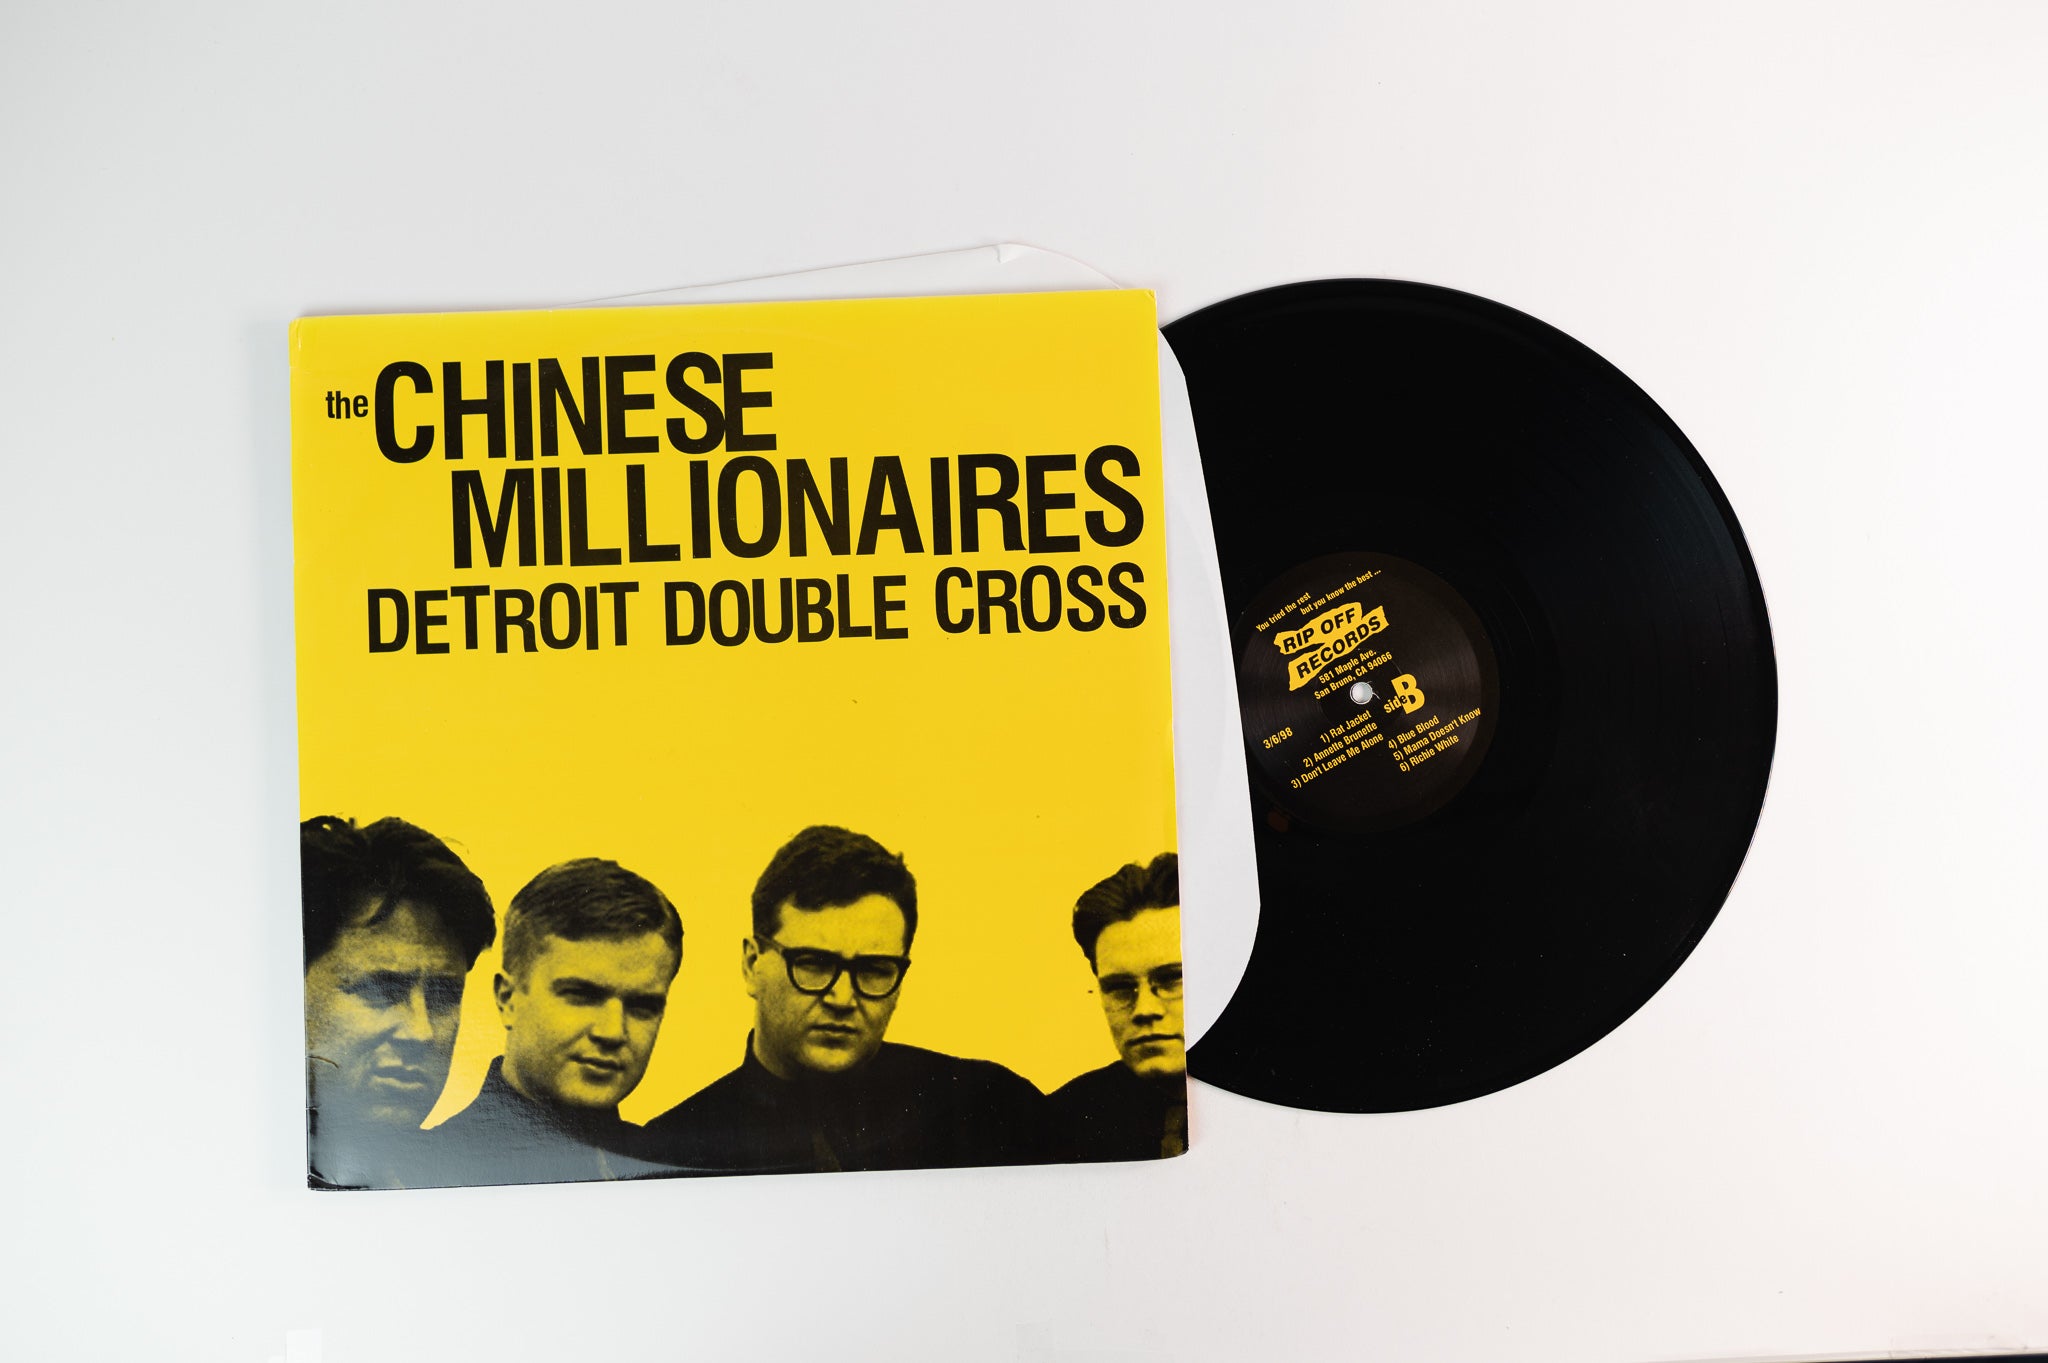 The Chinese Millionaires - Detroit Double Cross on Rip Off Records